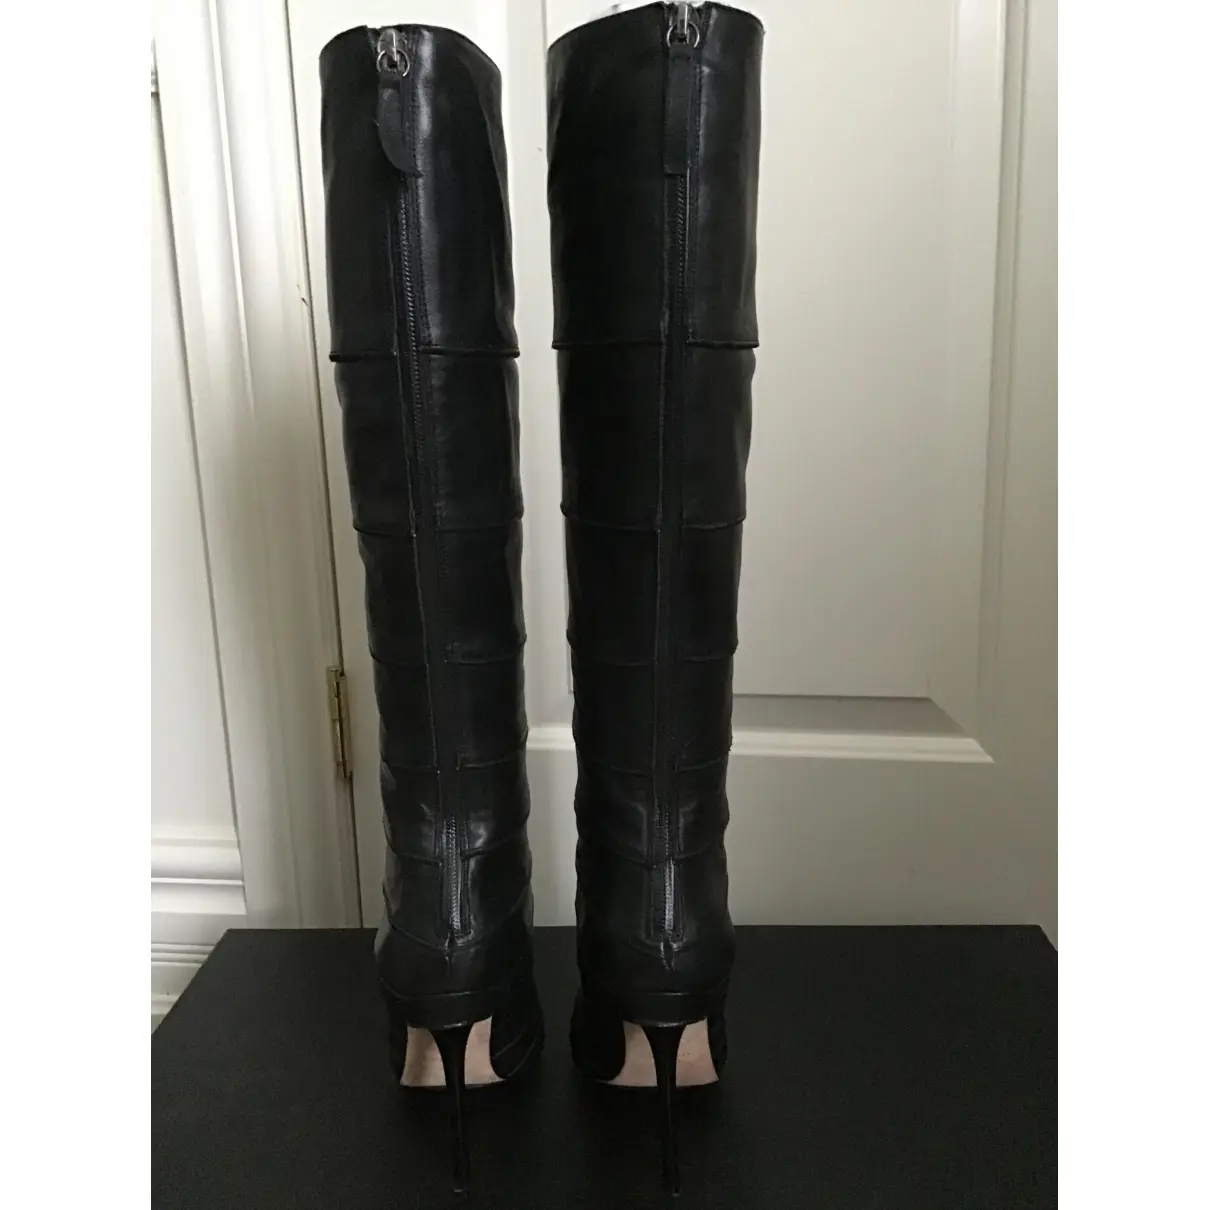 Buy L.A.M.B Leather boots online